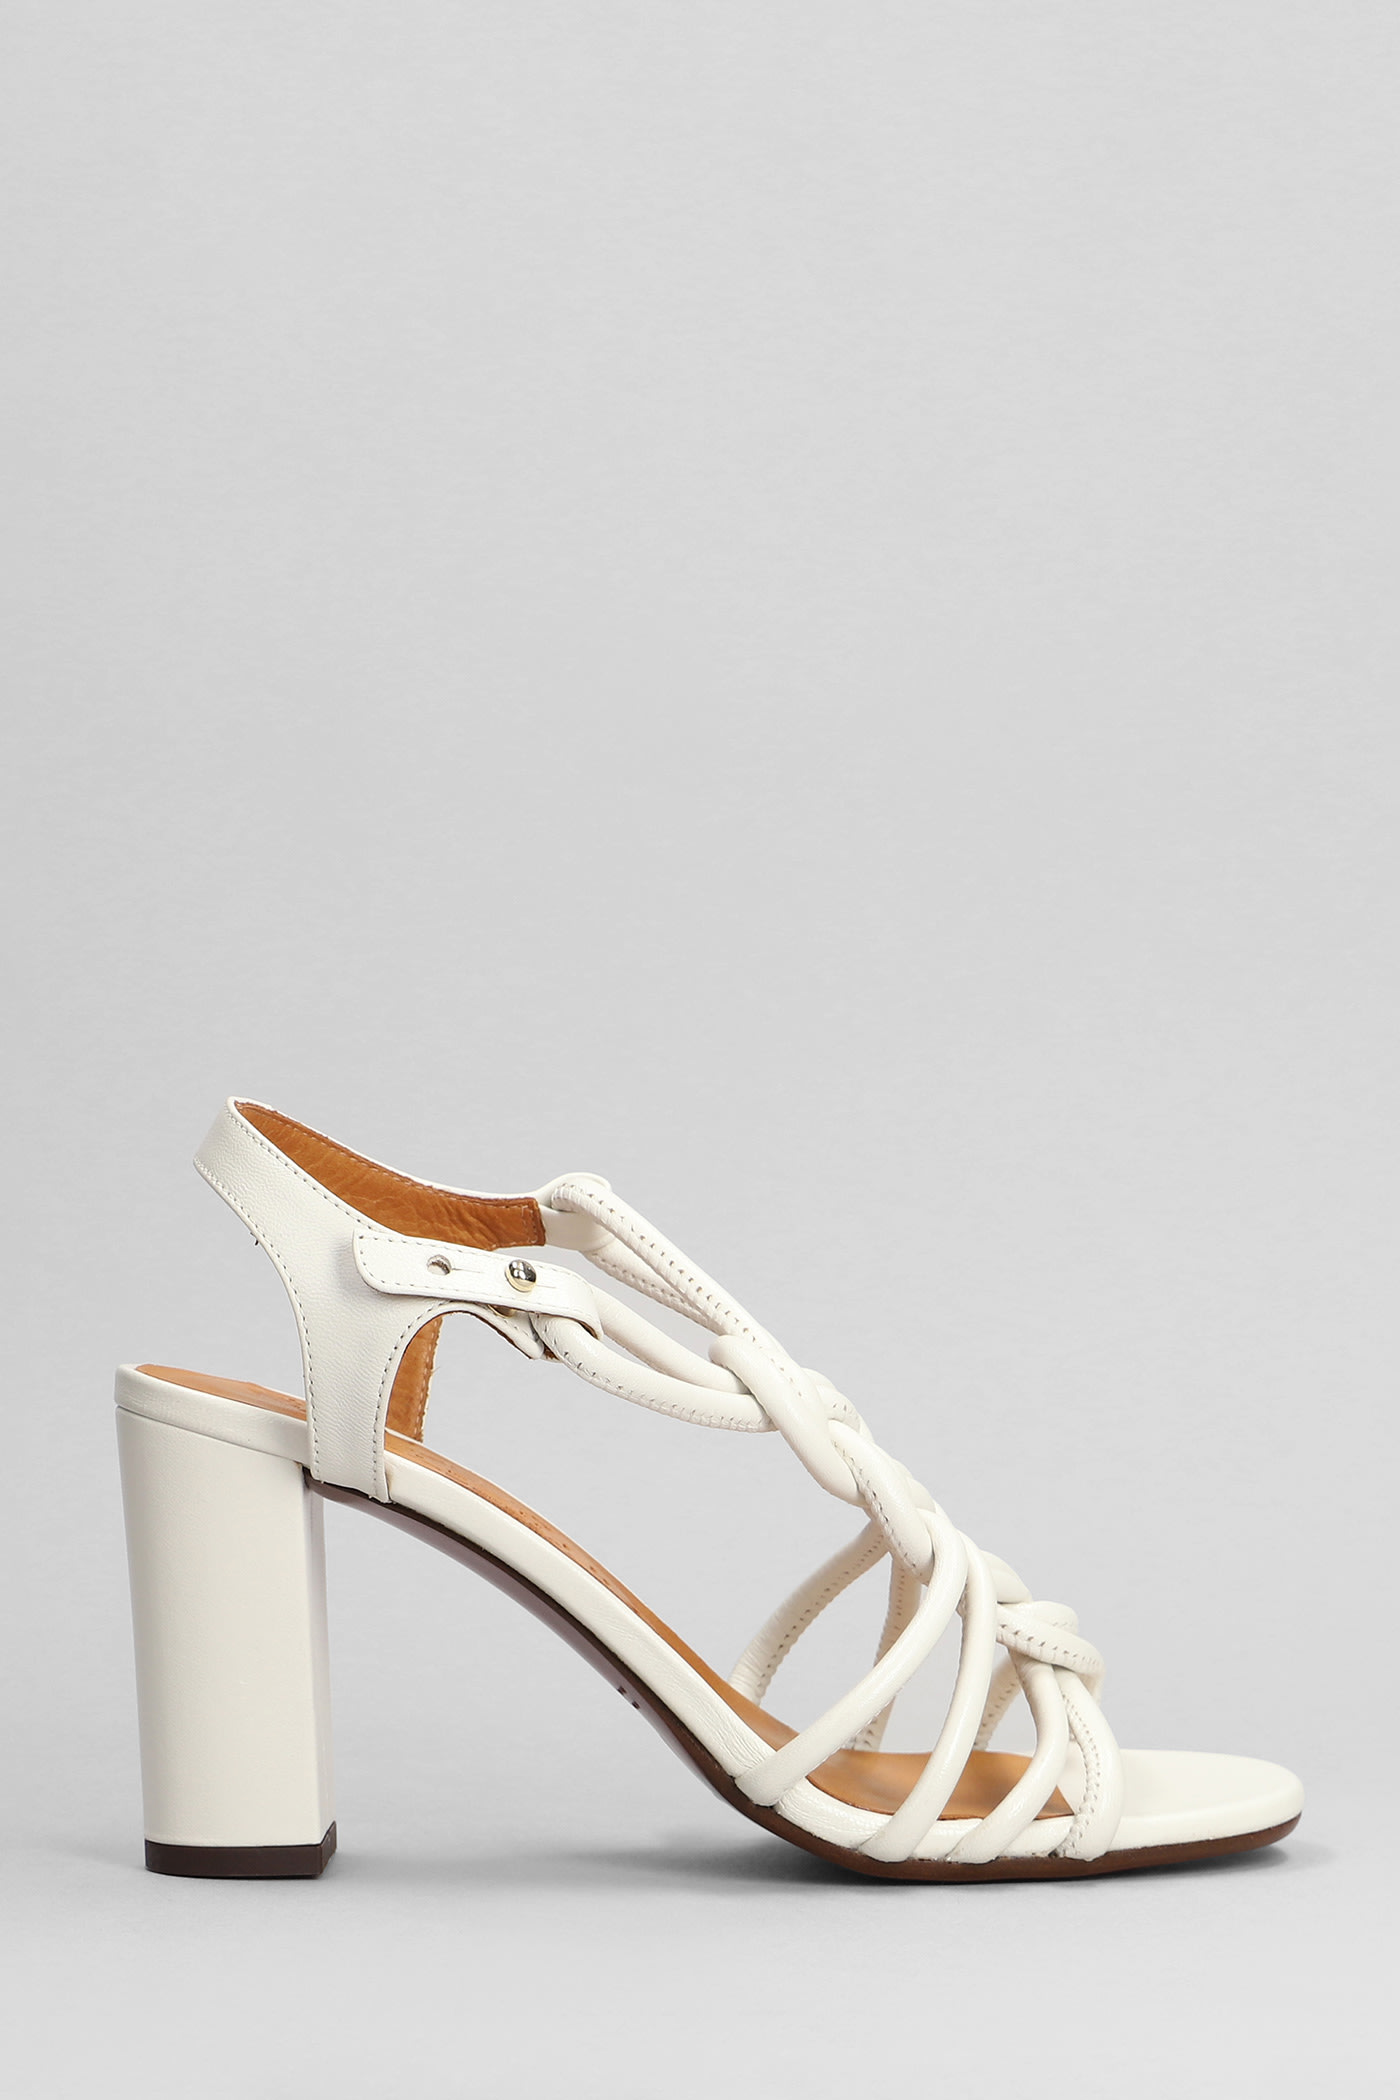 Bane Sandals In White Leather